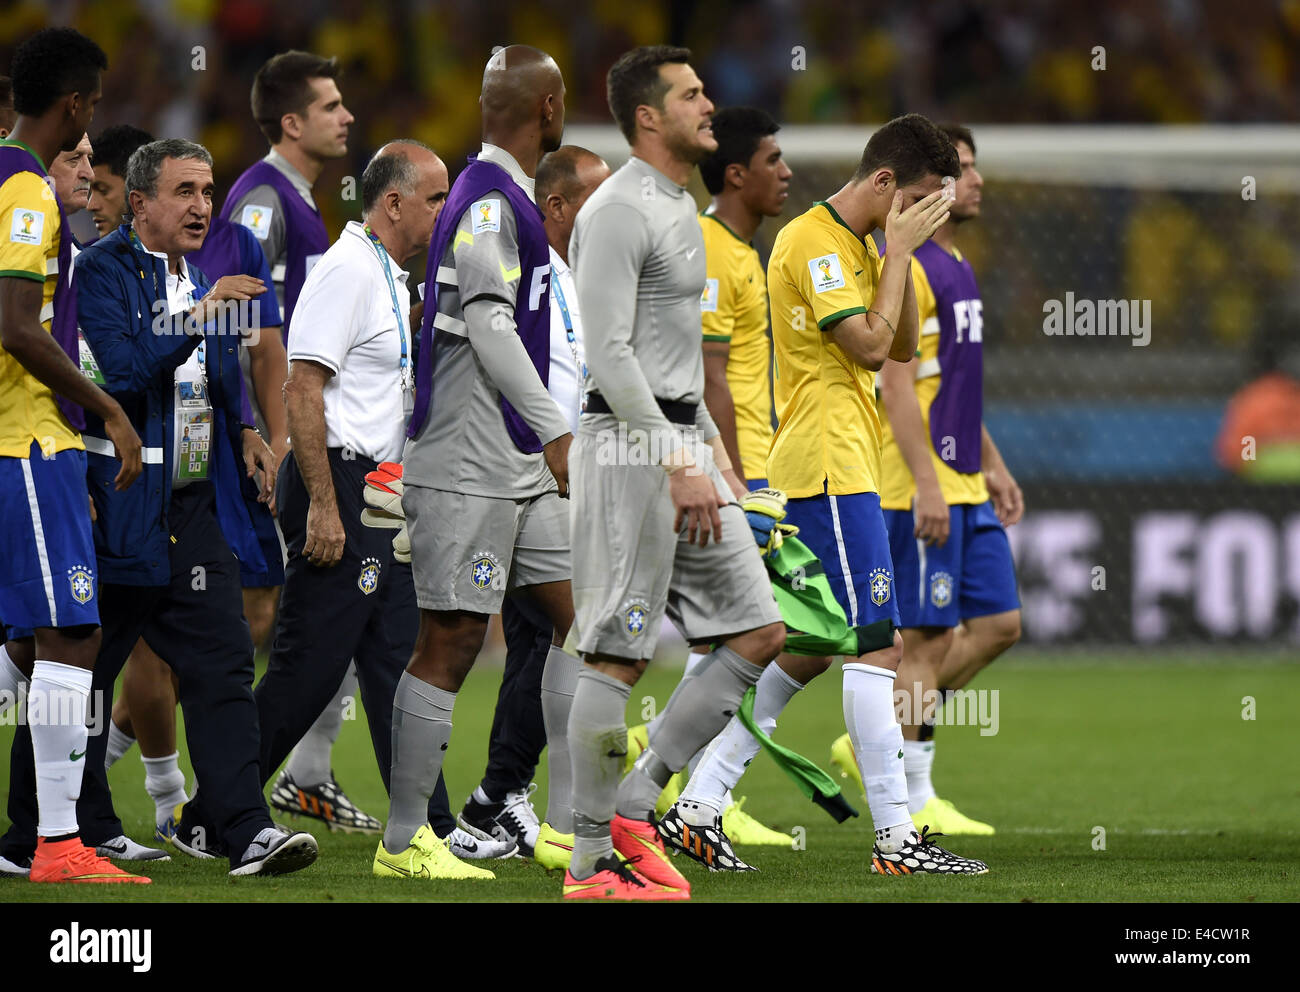 Belo Horizonte, Brazil. 8th July, 2014. Brazil's players leave the field after a semifinal match between Brazil and Germany of 2014 FIFA World Cup at the Estadio Mineirao Stadium in Belo Horizonte, Brazil, on July 8, 2014. Germany won 7-1 over Brazil and qualified for the final on Tuesday. Credit:  Qi Heng/Xinhua/Alamy Live News Stock Photo